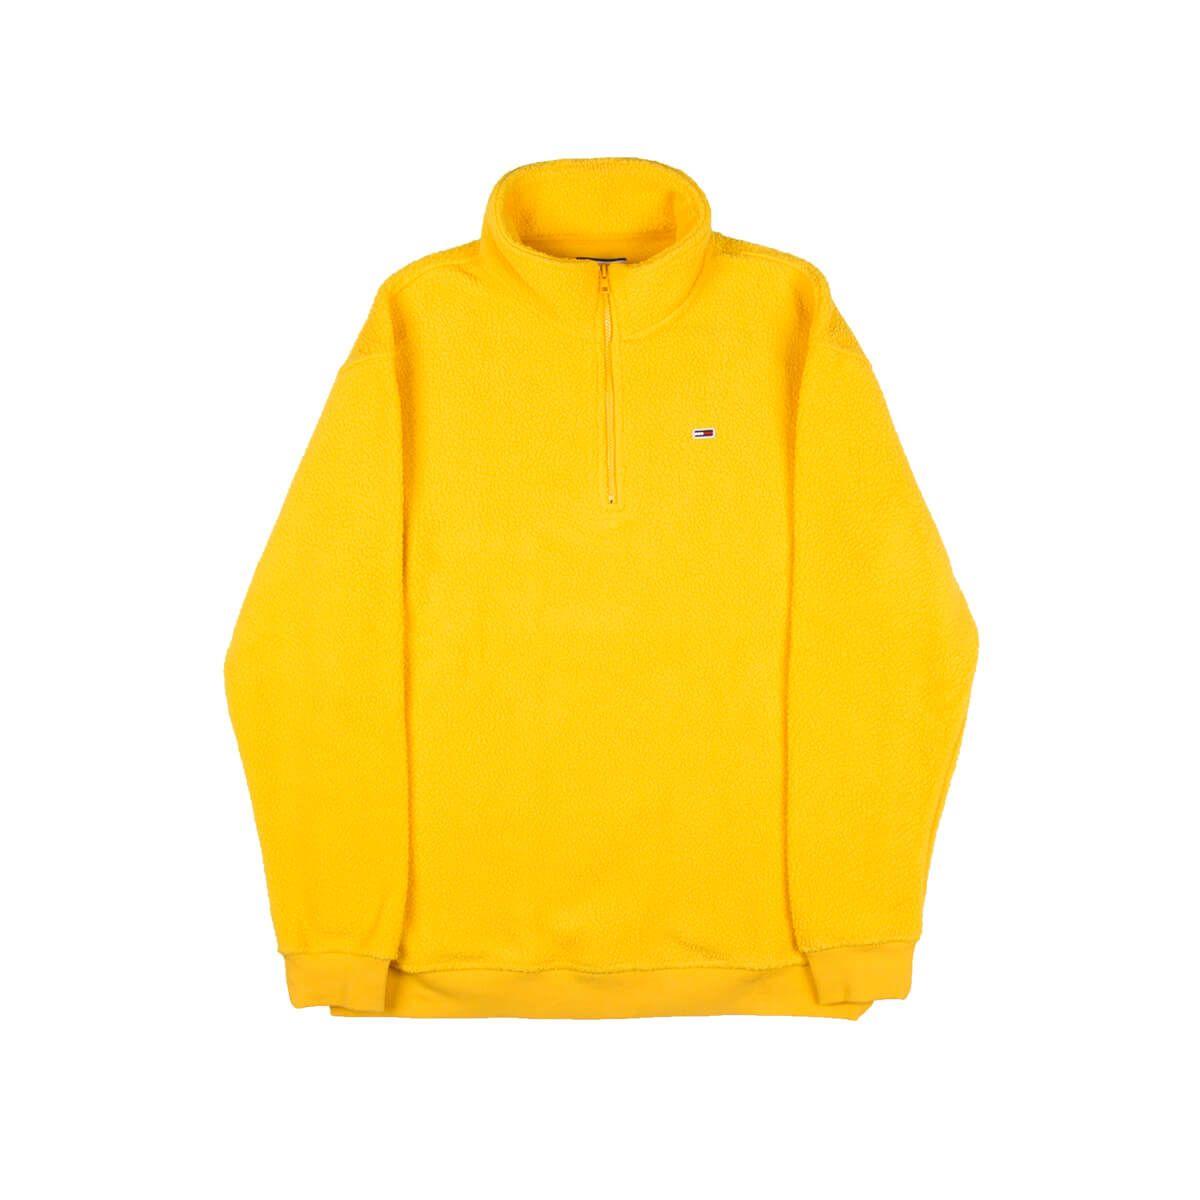 Tommy Hilfiger Fleece Yellow Store, 51% OFF | a4accounting.com.au